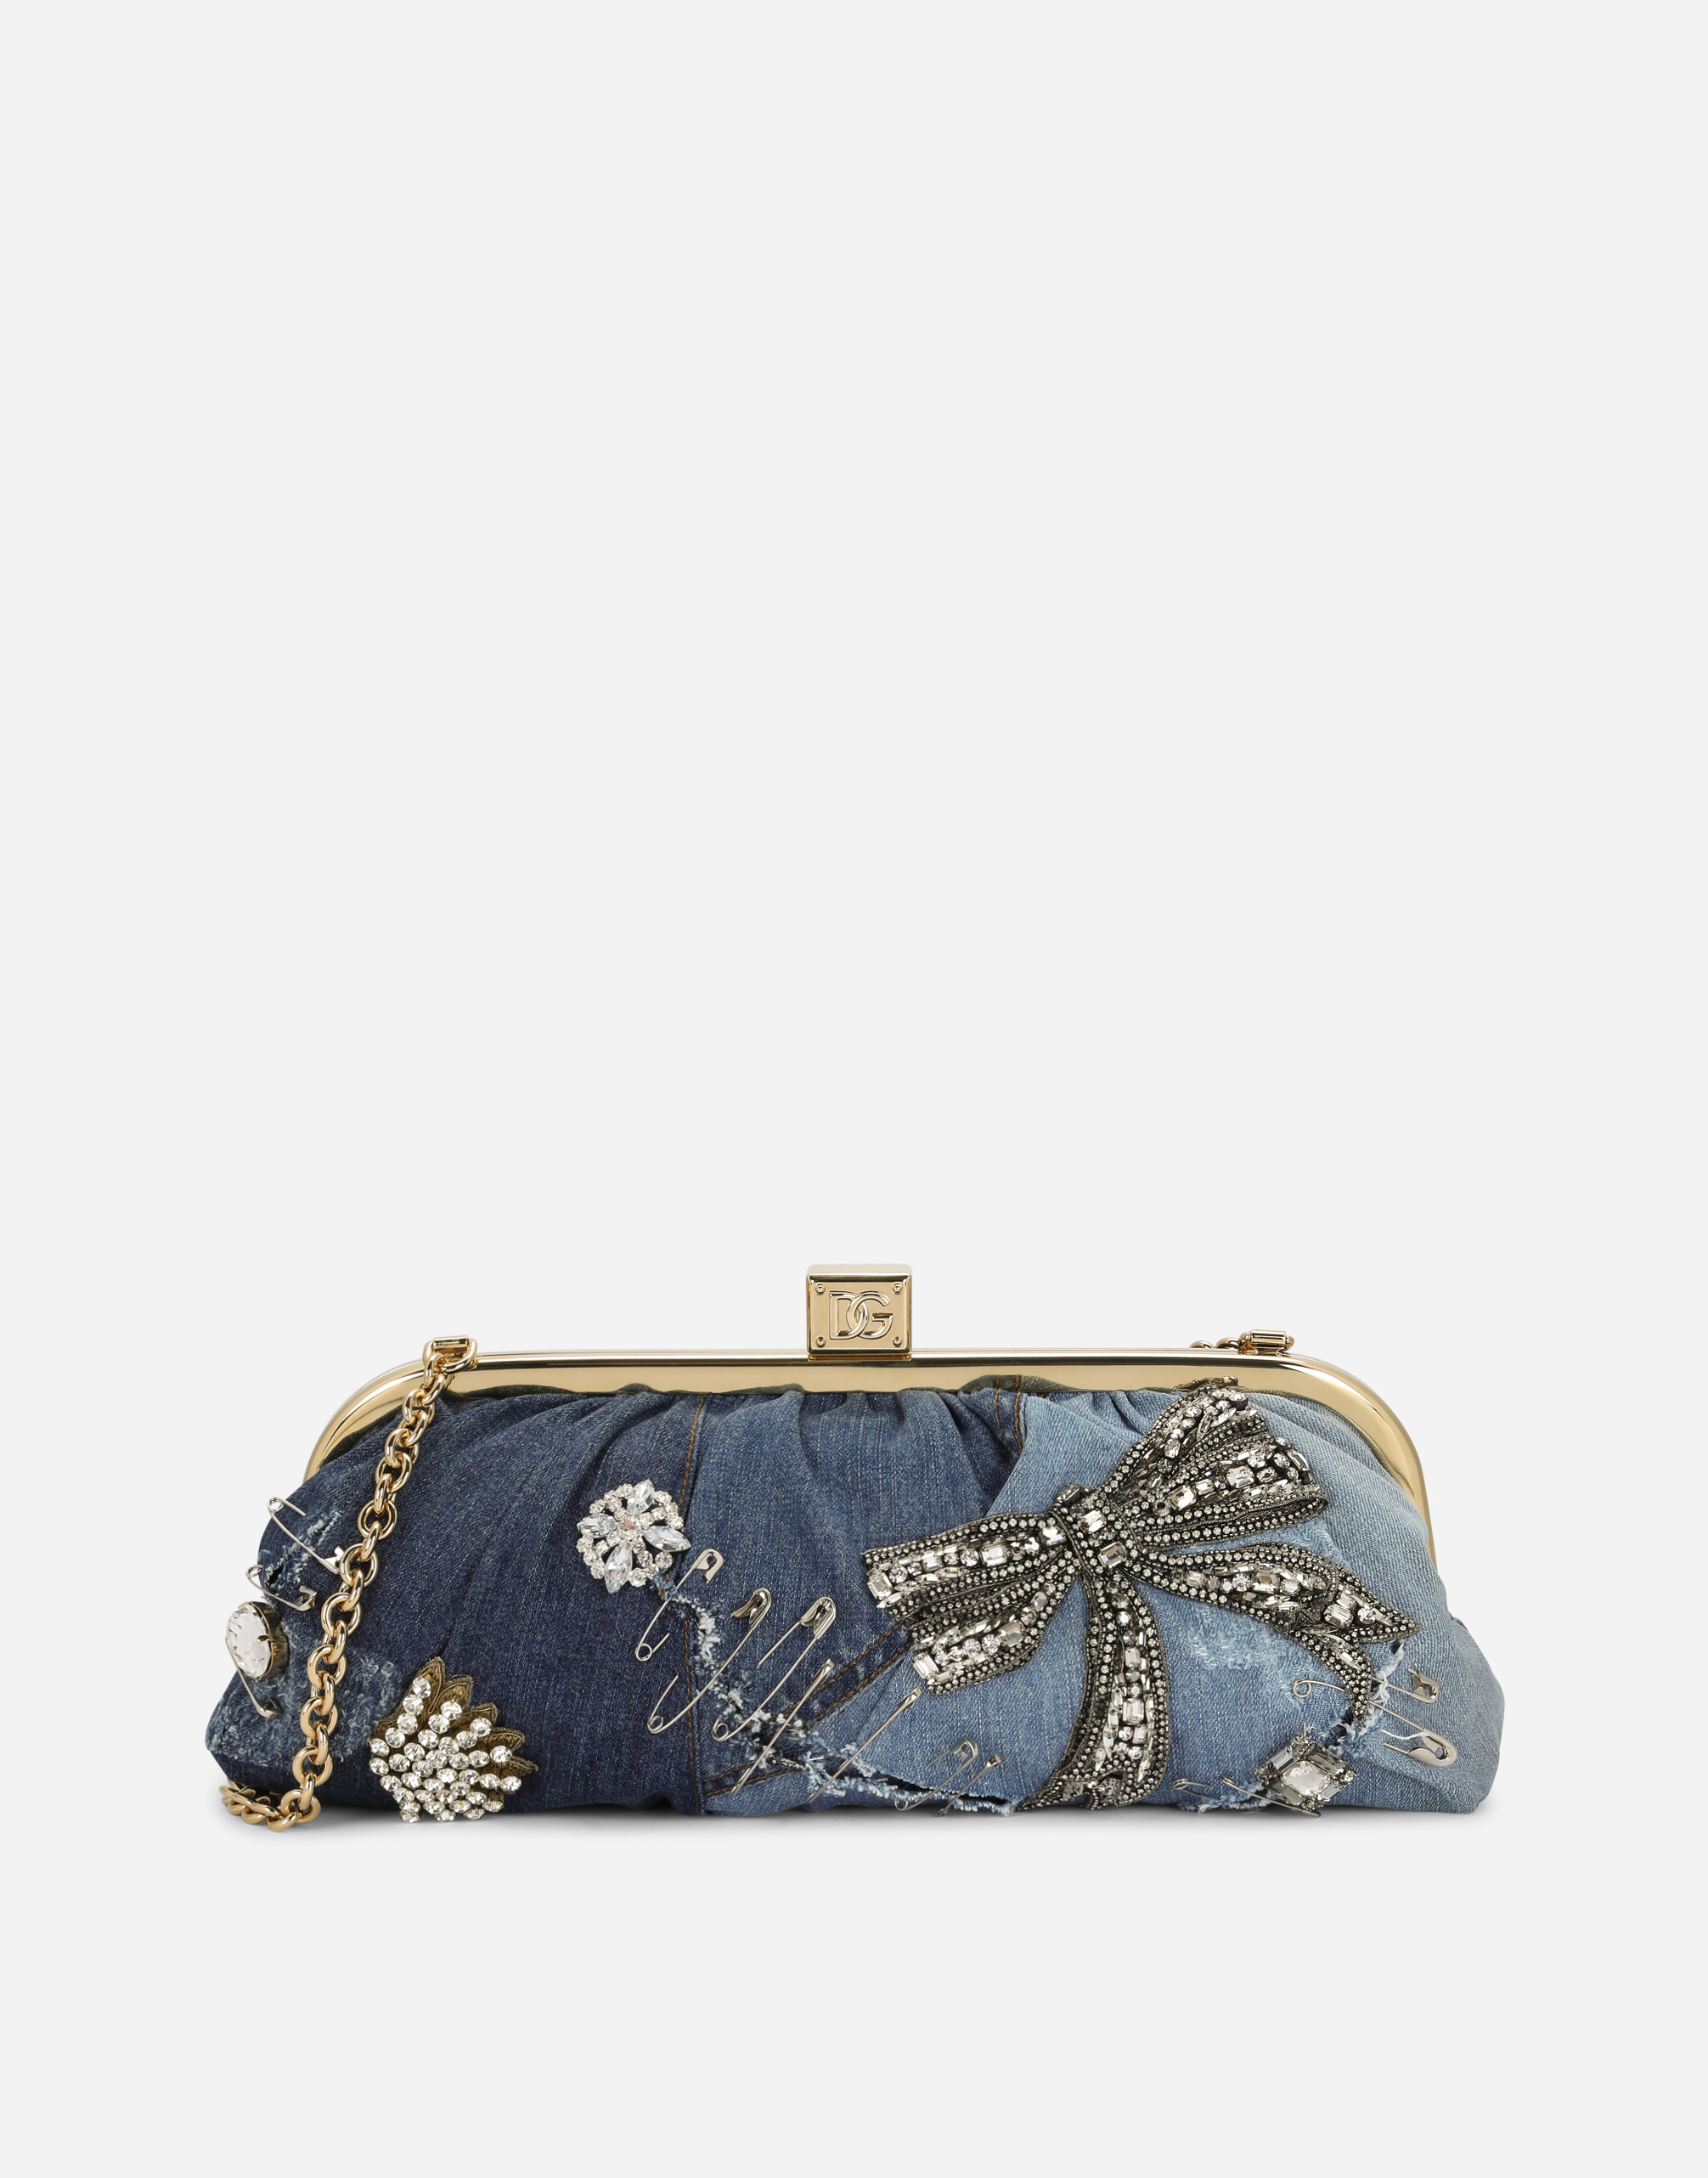 Patchwork denim Maria clutch with embroidery